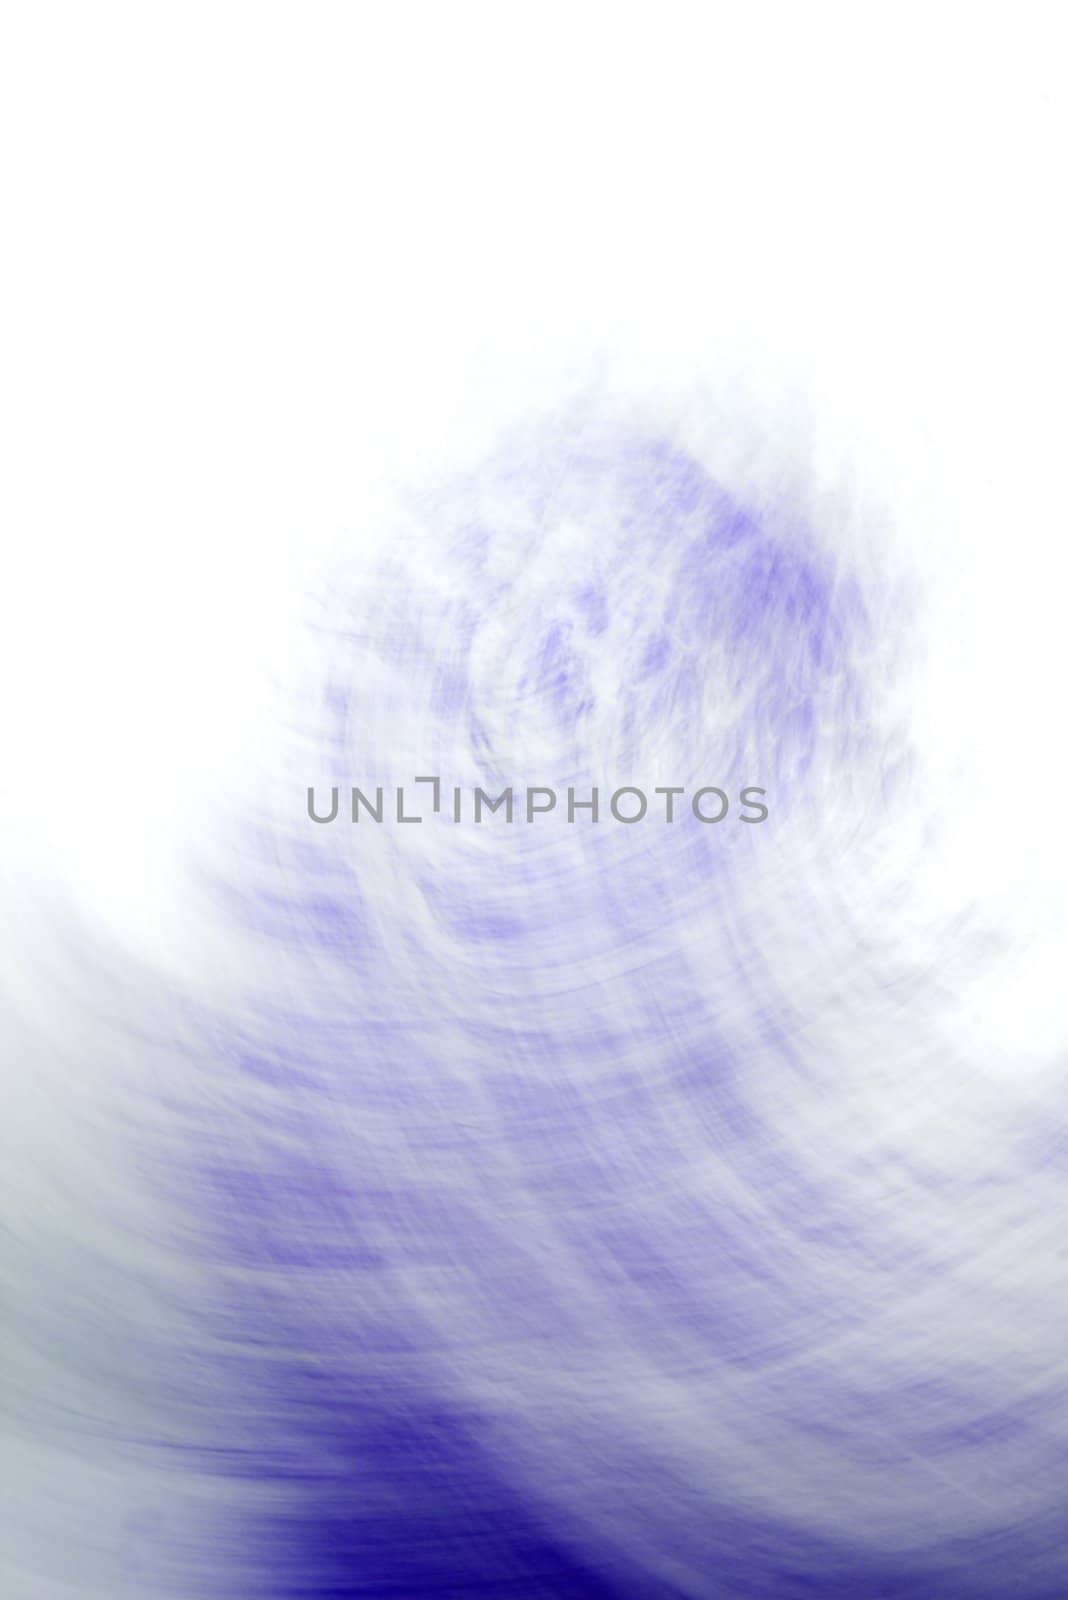 Abstract background with blue curves on white background